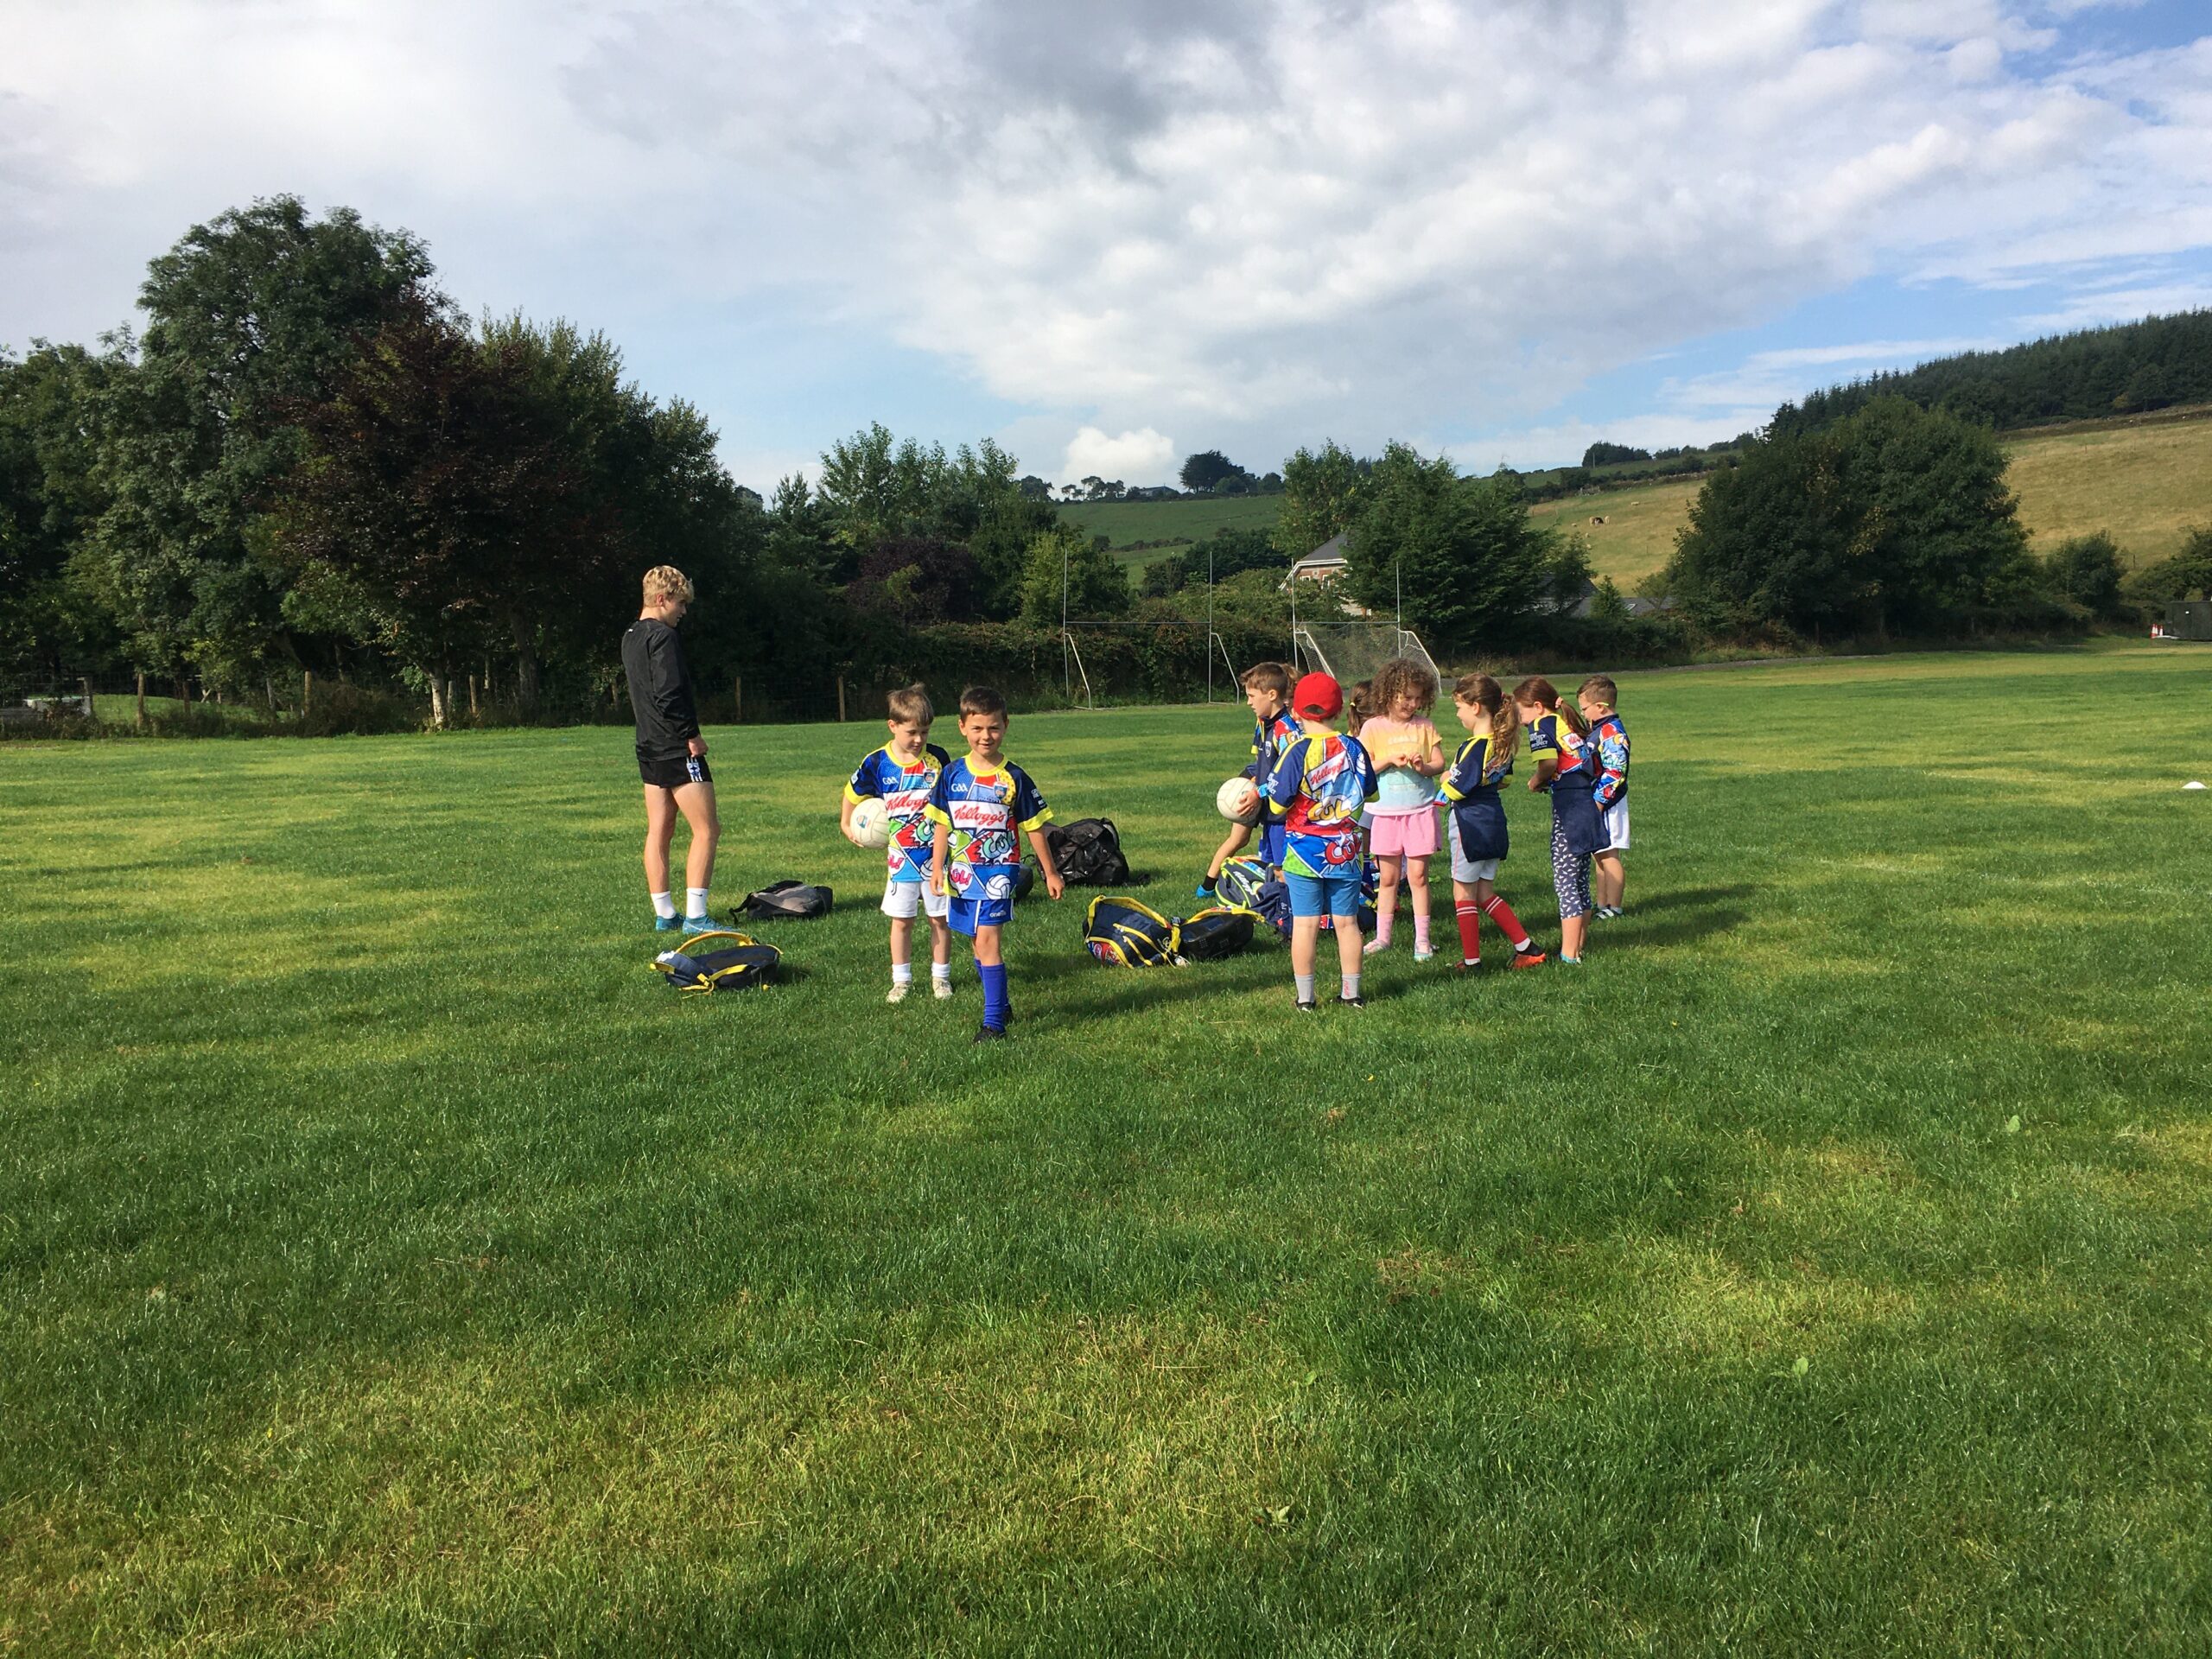 After three years the Cul Camps are back in Kilbride with a sell out…over 60 kids